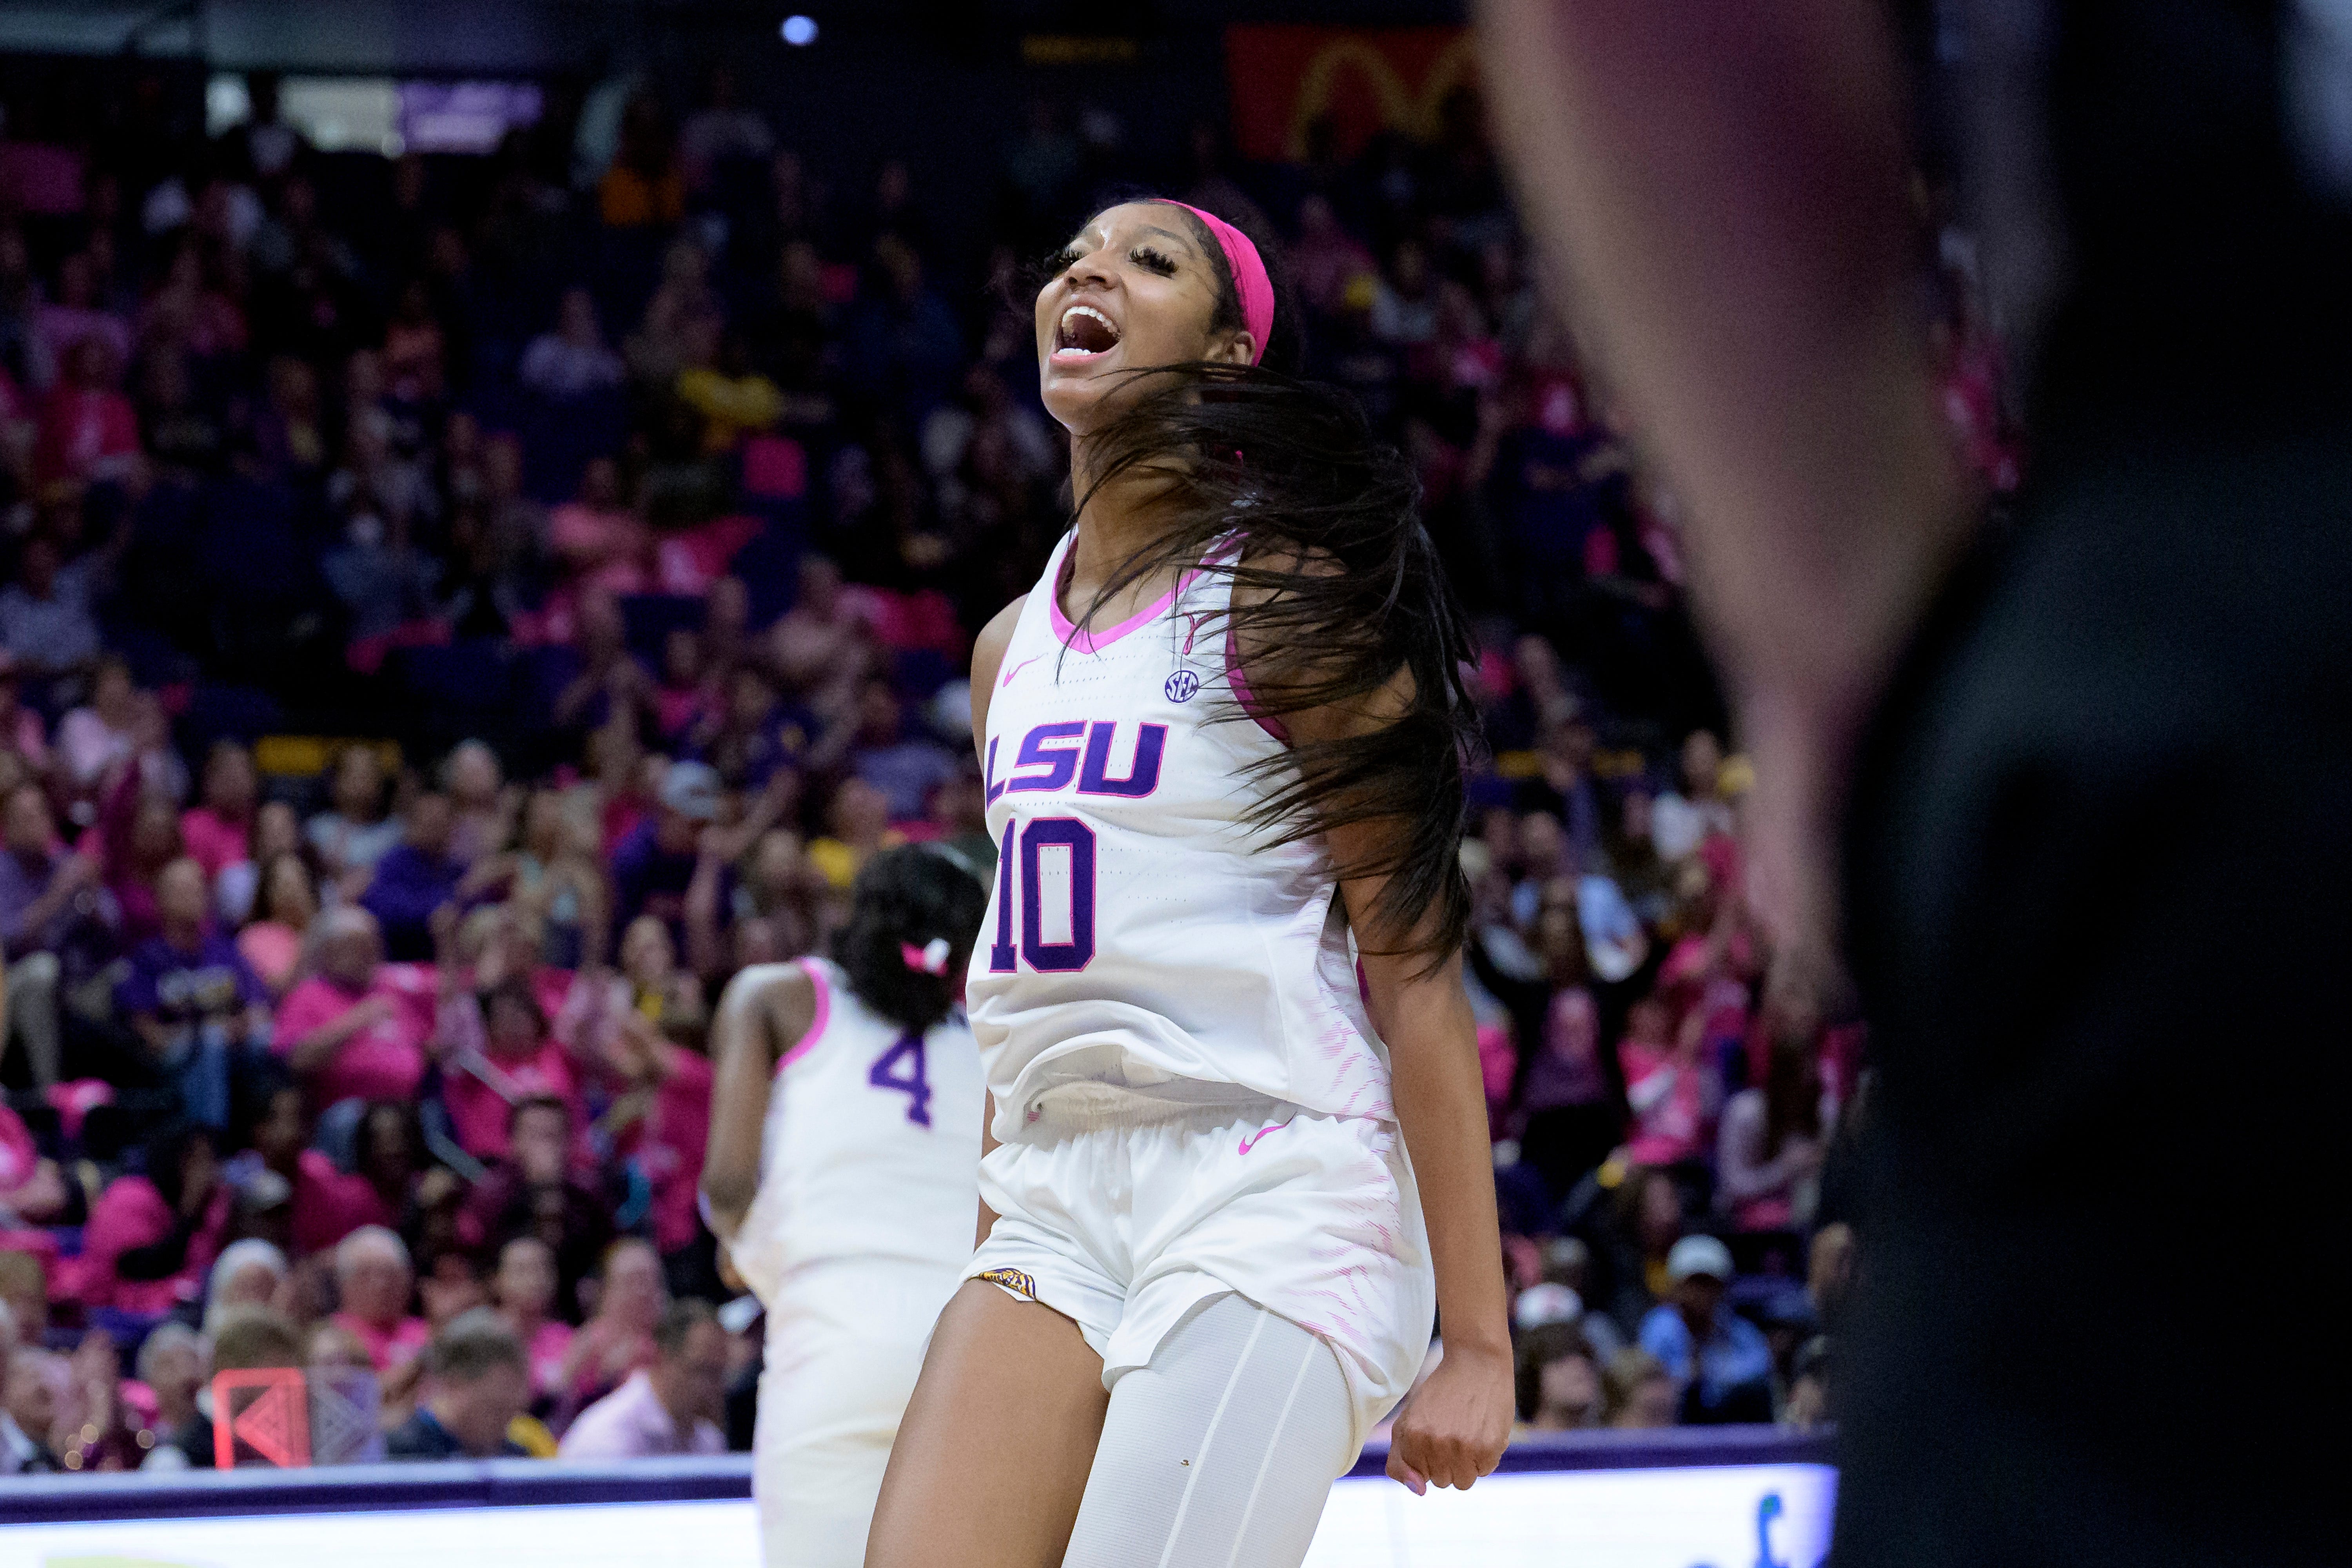 LSU forward Angel Reese (10) reacts in the second half of an NCAA college basketball game against Mississippi, Thursday, Feb. 16, 2023, in Baton Rouge, La. (AP Photo/Matthew Hinton)